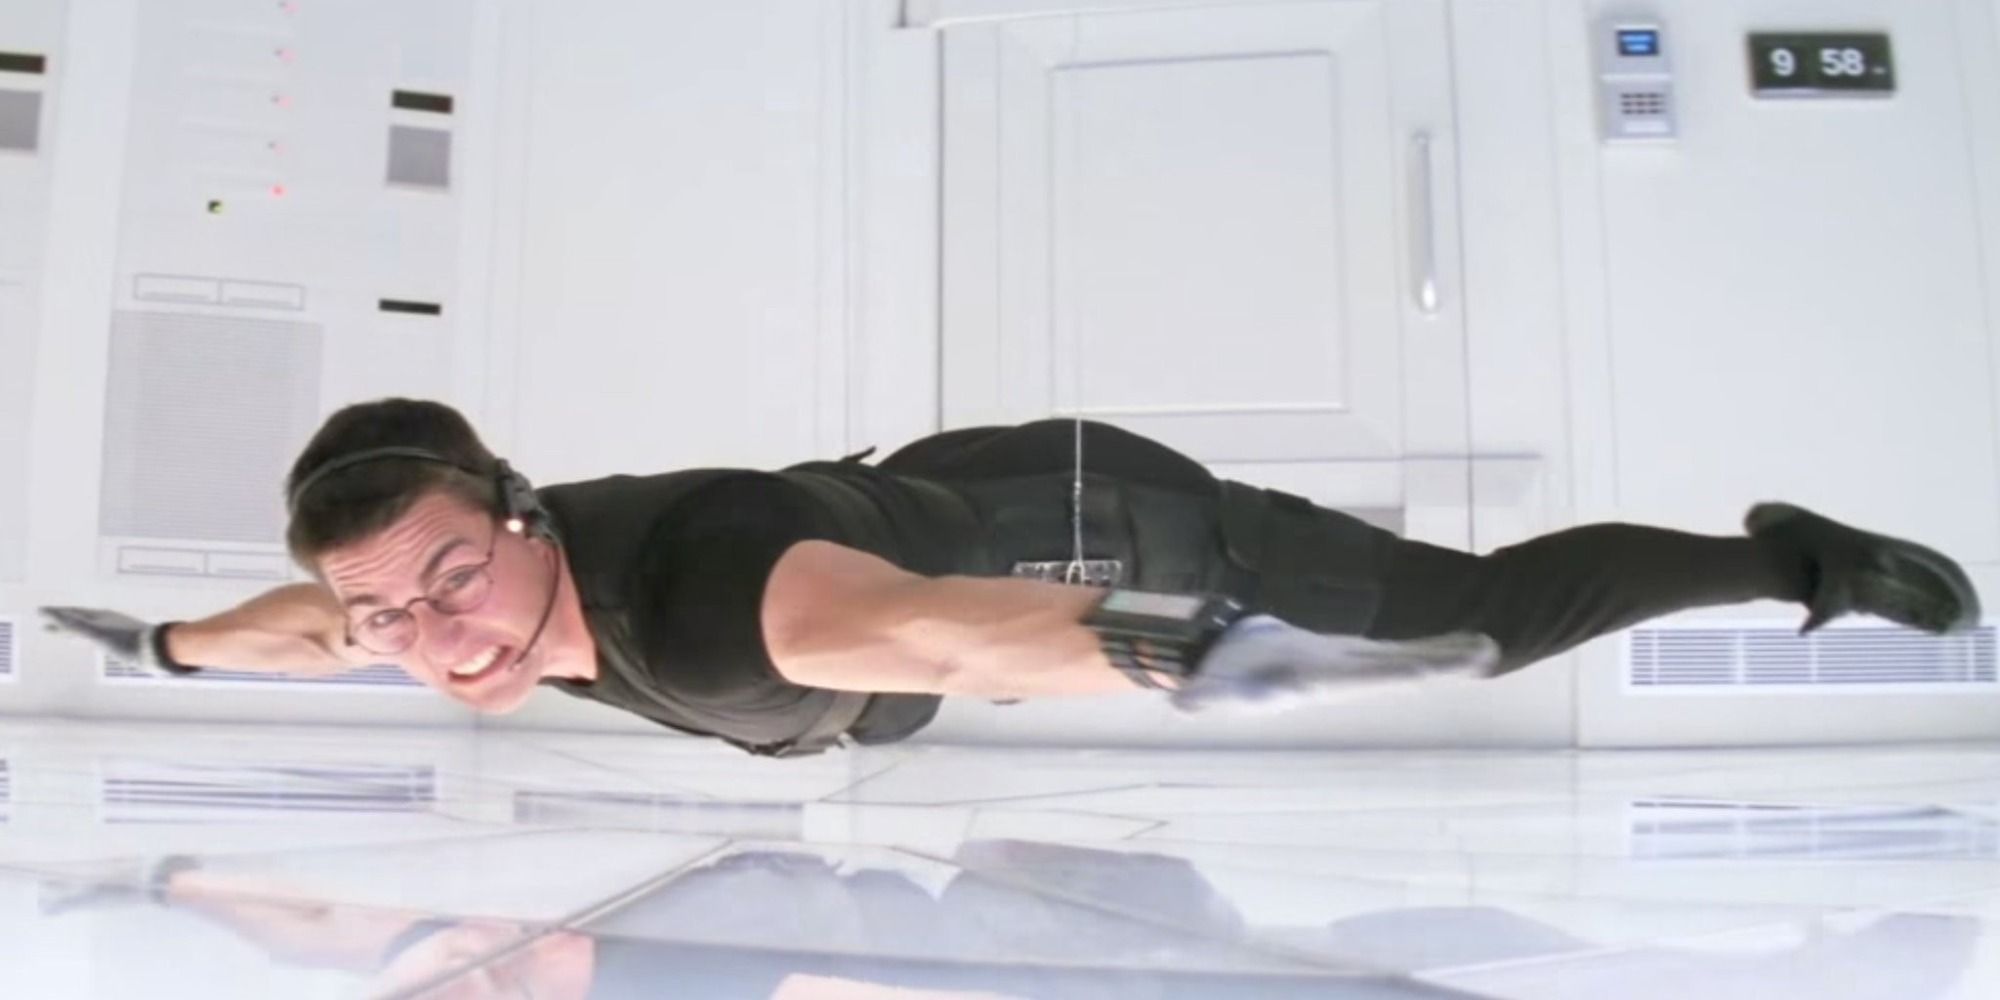 Ethan Hunt bursts into the CIA from the ceiling 